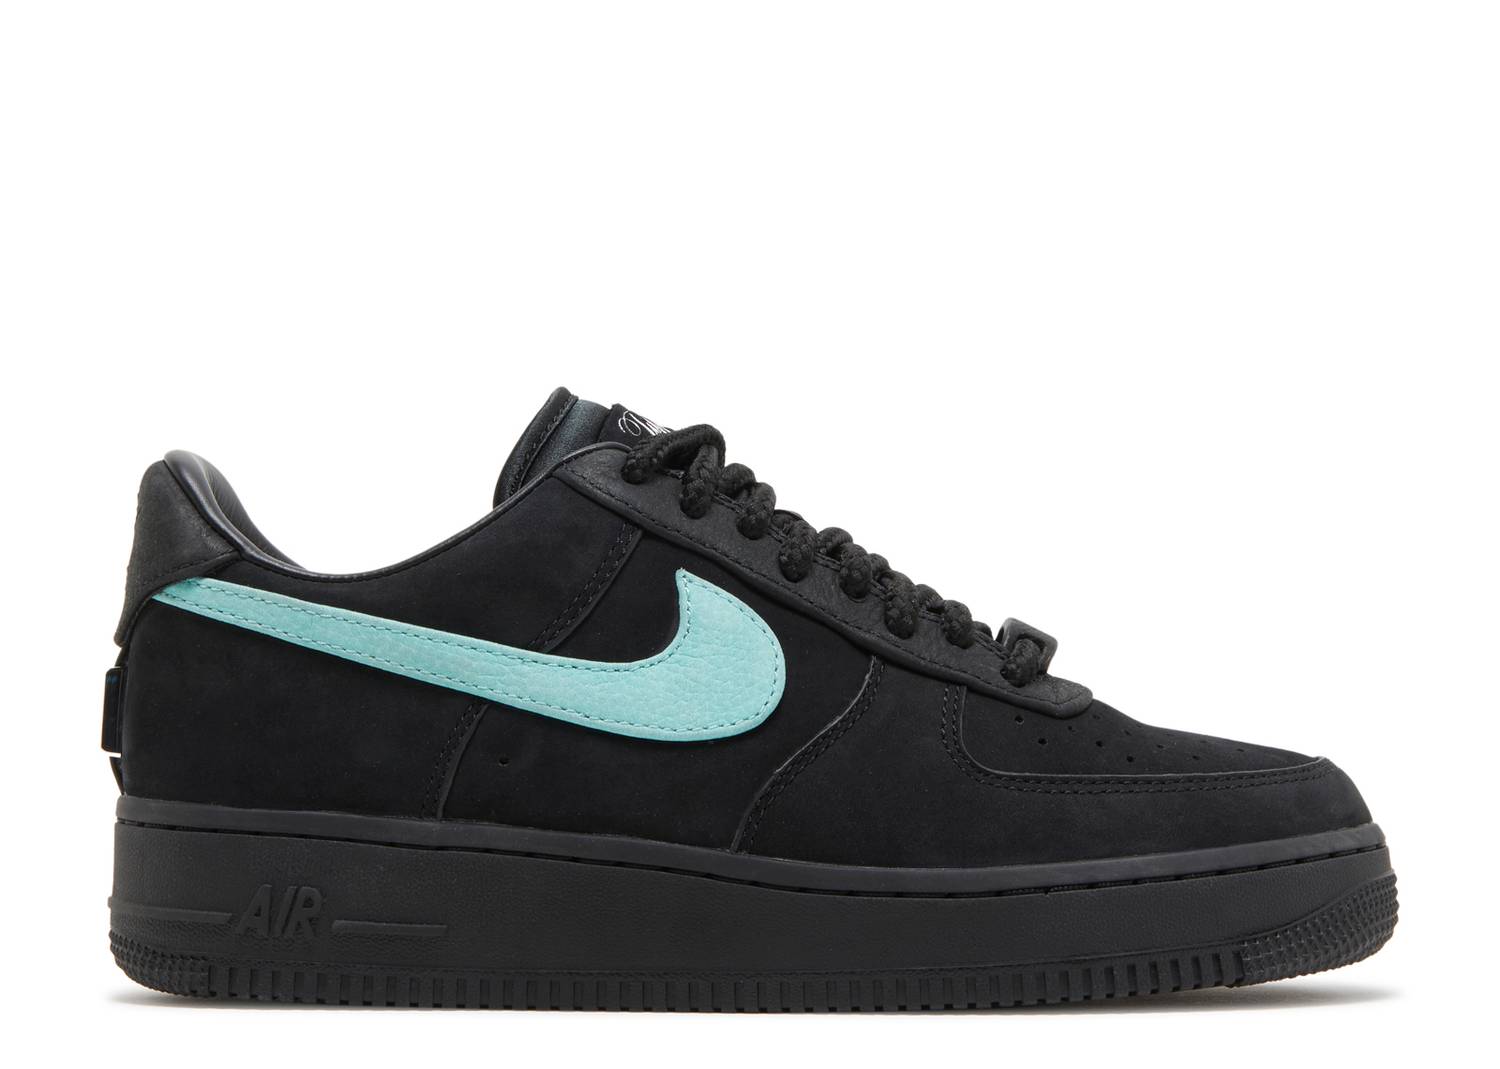 TIFFANY & CO. X AIR FORCE 1 LOW “1837” – ENDLESS